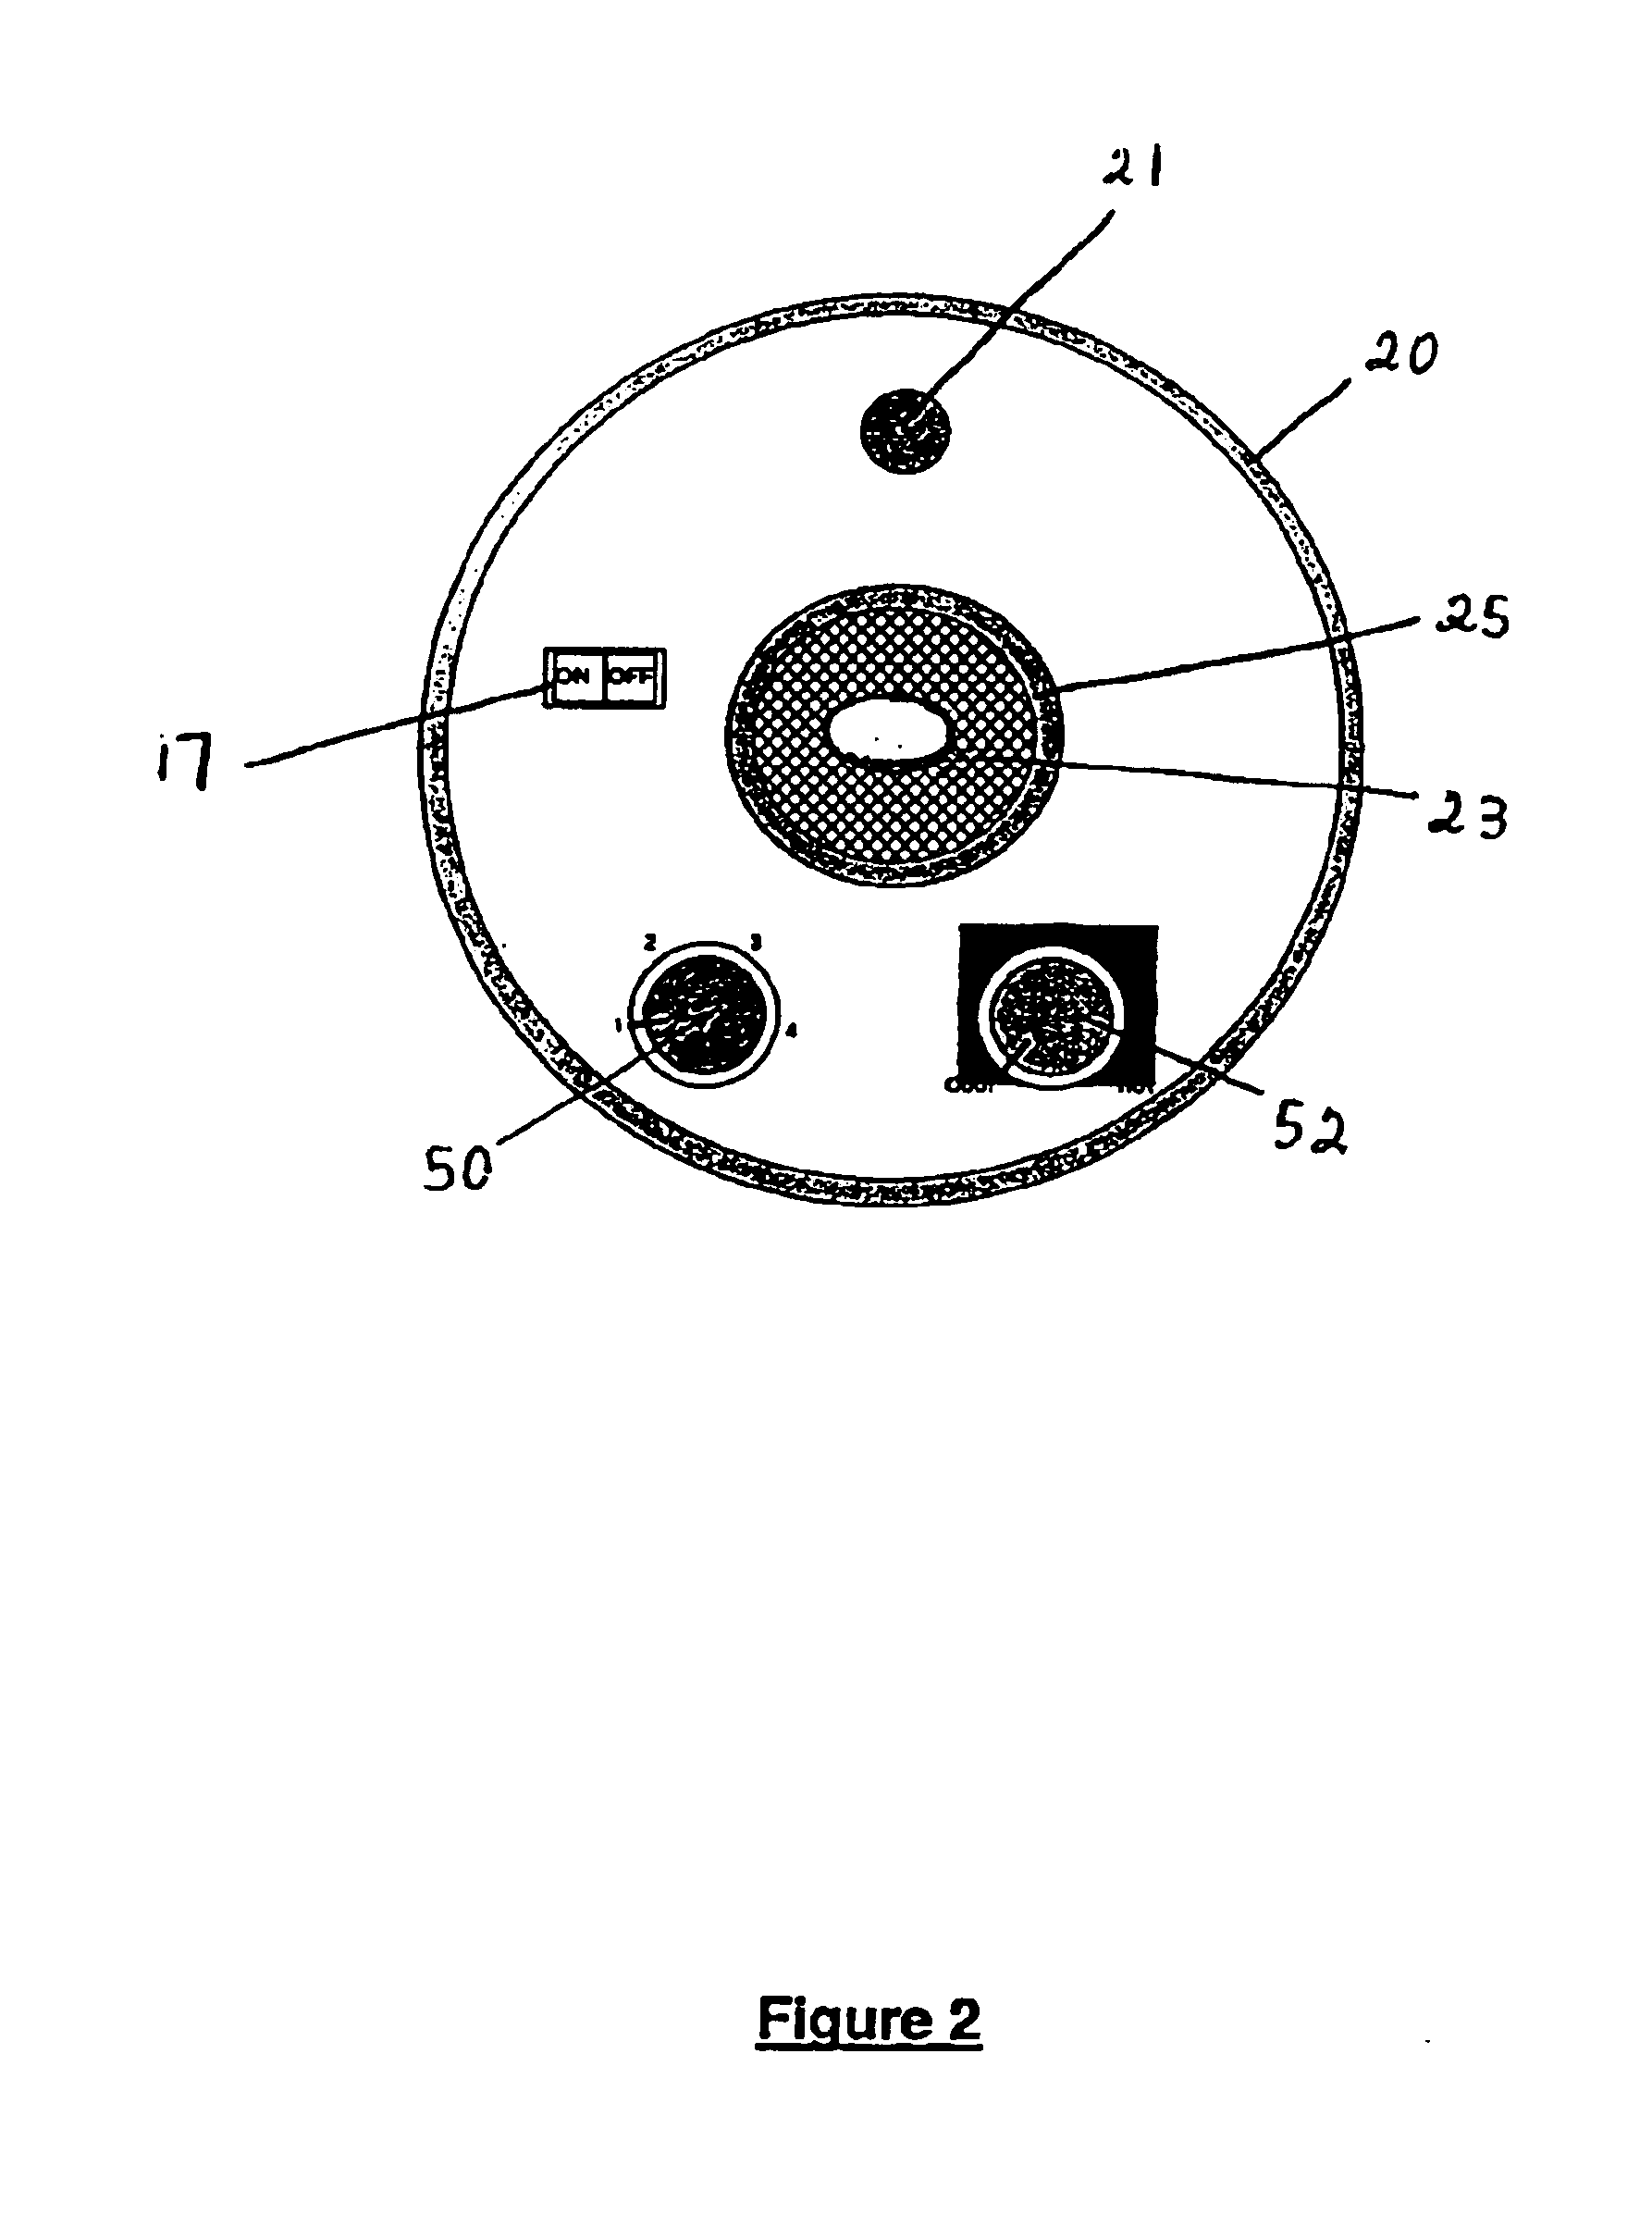 Grooming device with vacuum for drying and straightening hair